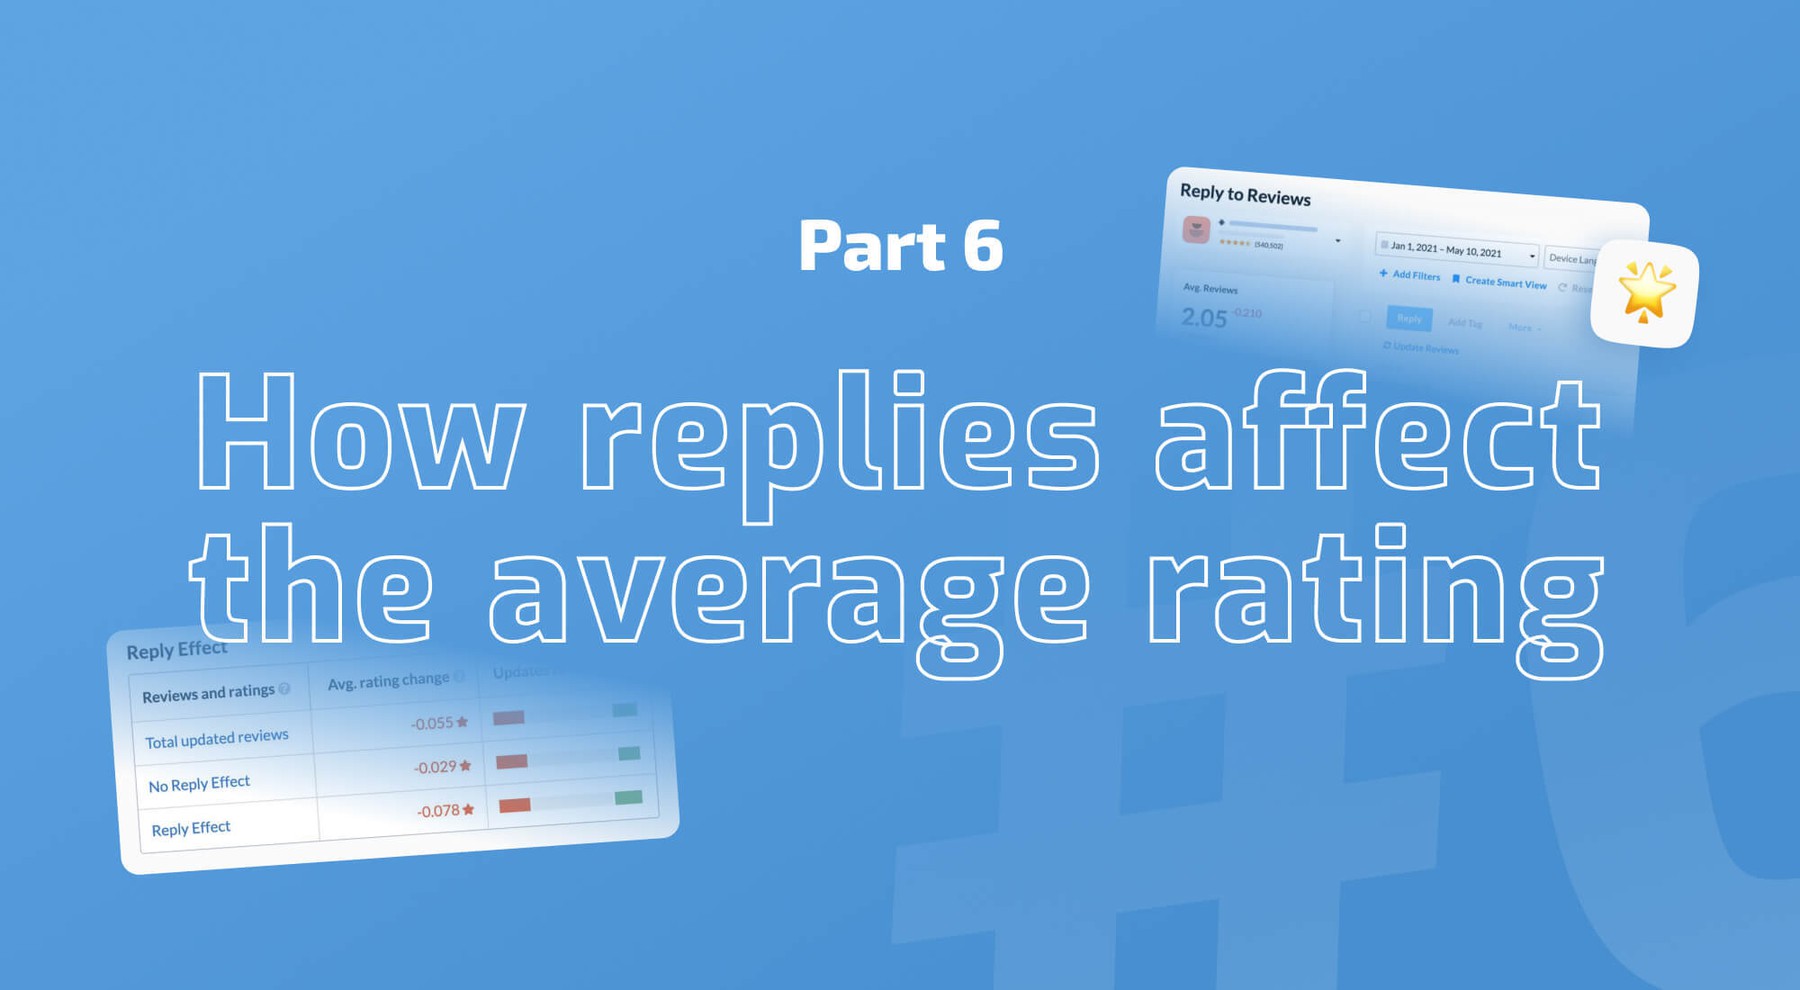 How replies affect the average rating